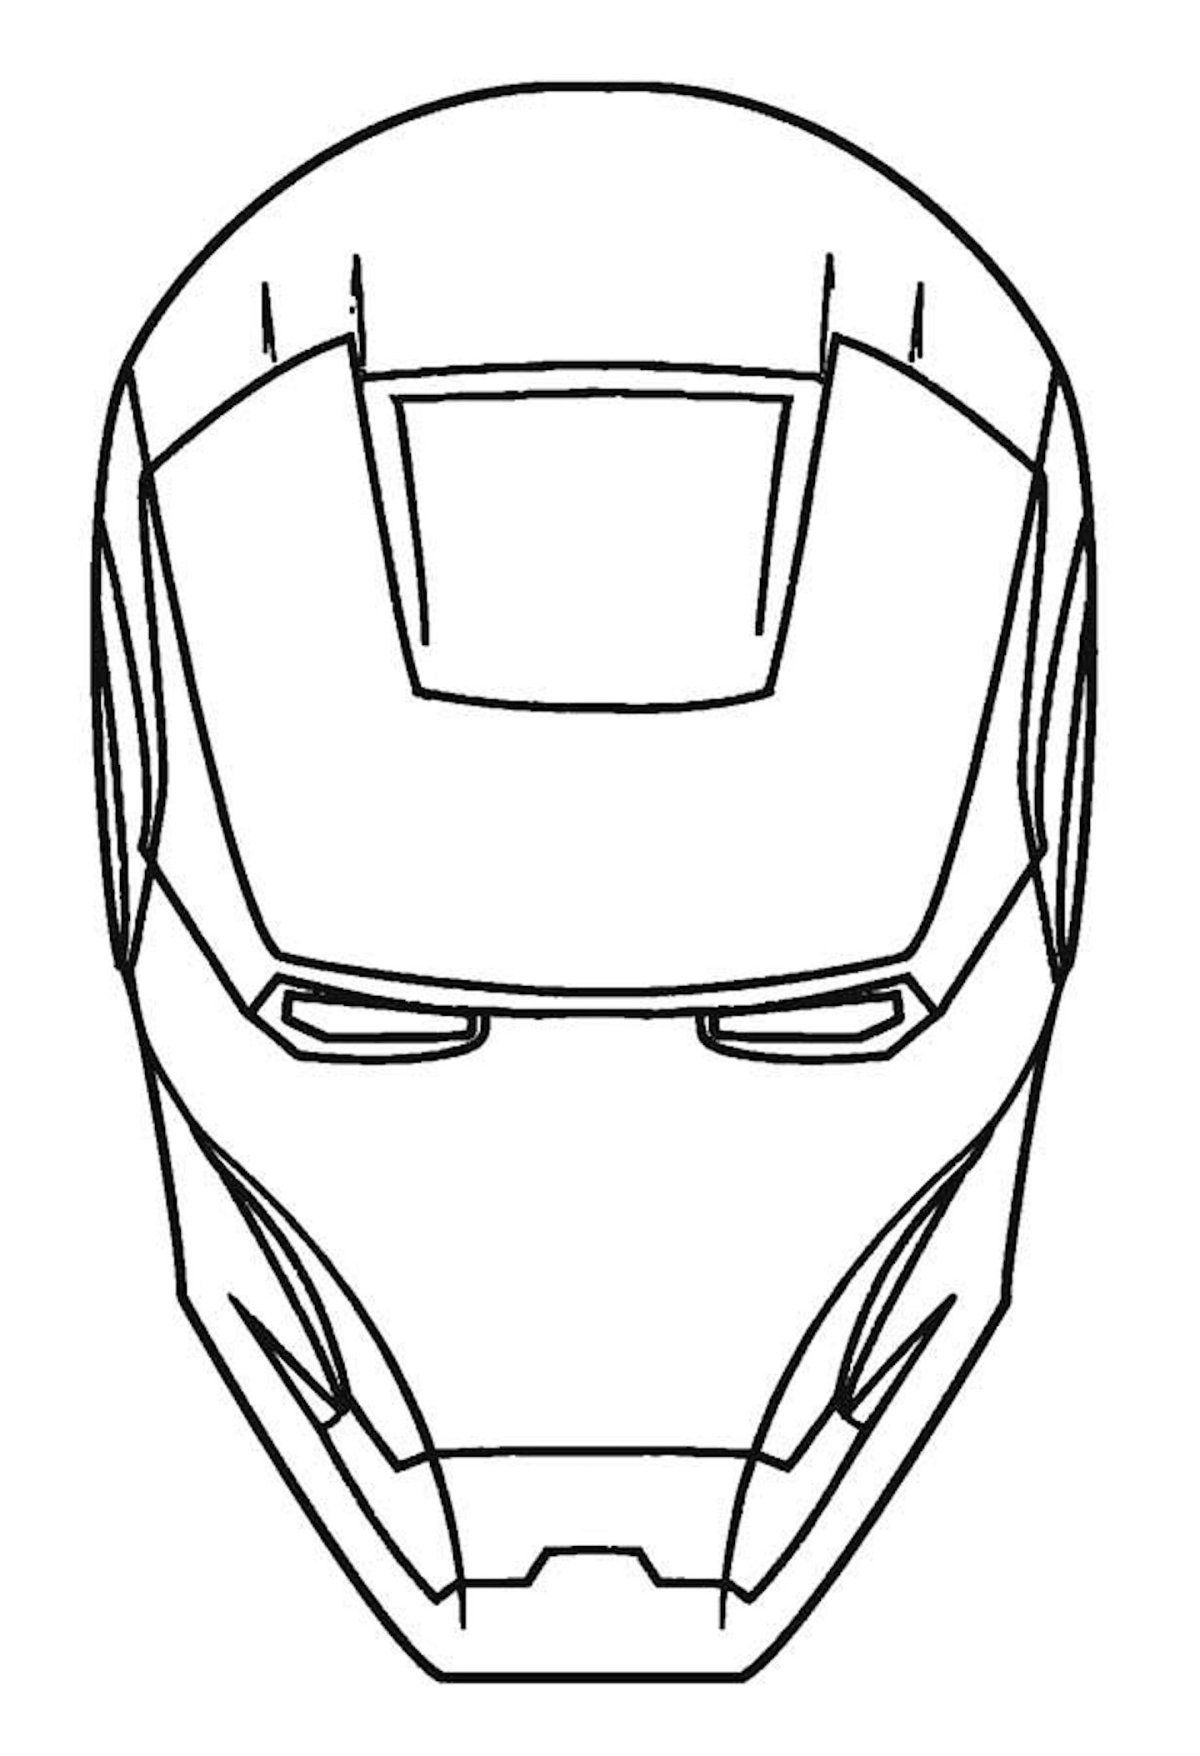 Coloring iron man mask with imagination